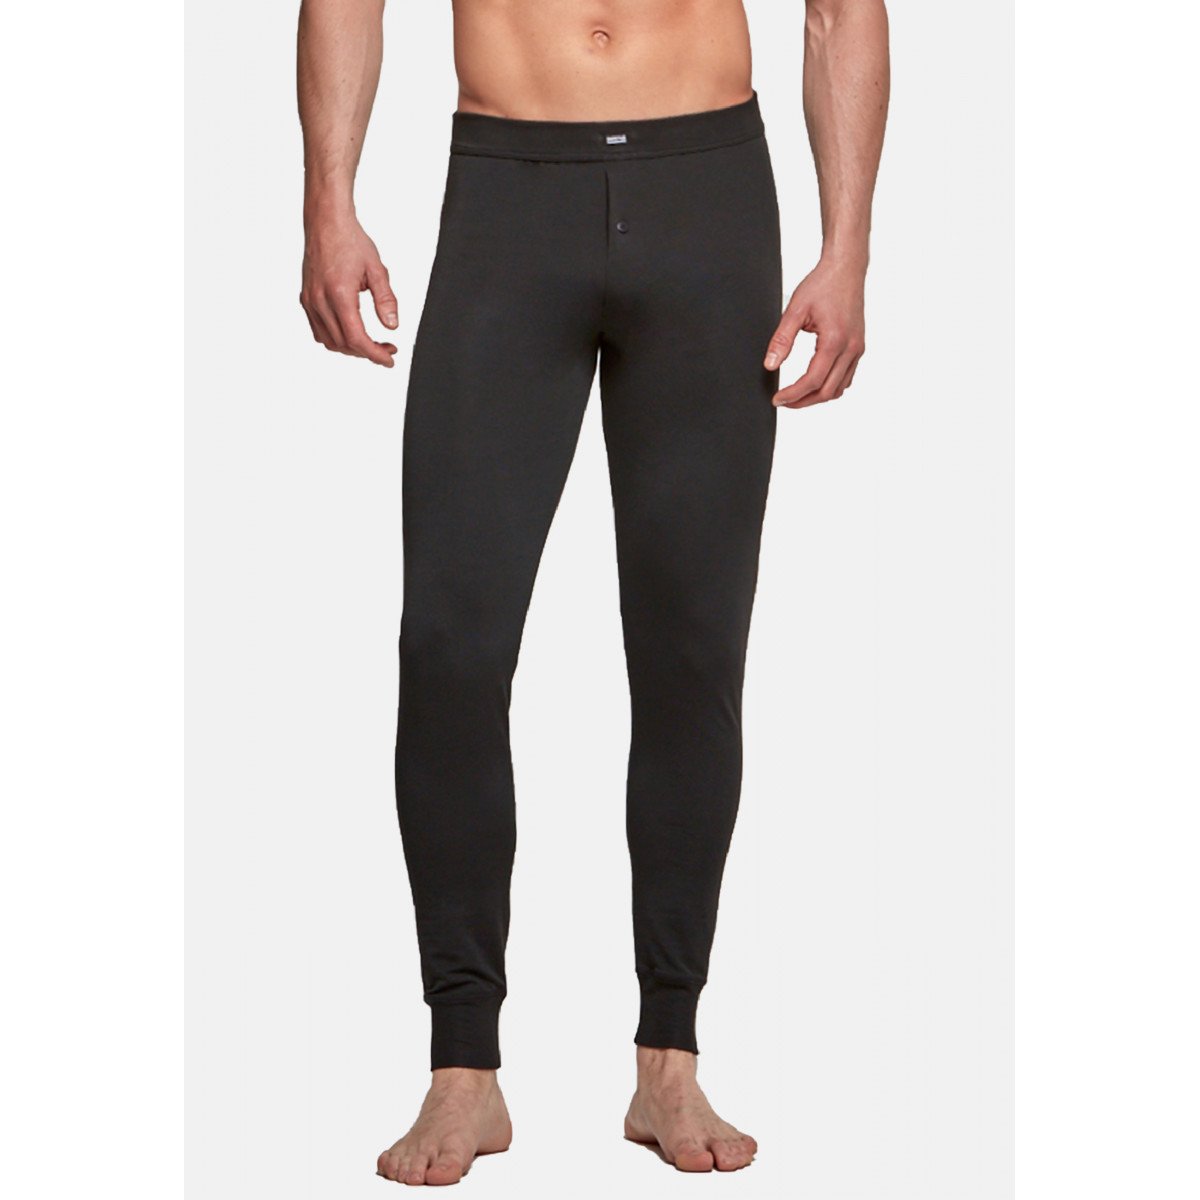 https://cdn.lingerie-story.fr/78365-thickbox_default/pantalon-homme-thermique-anti-froid-thermo-noir.jpg